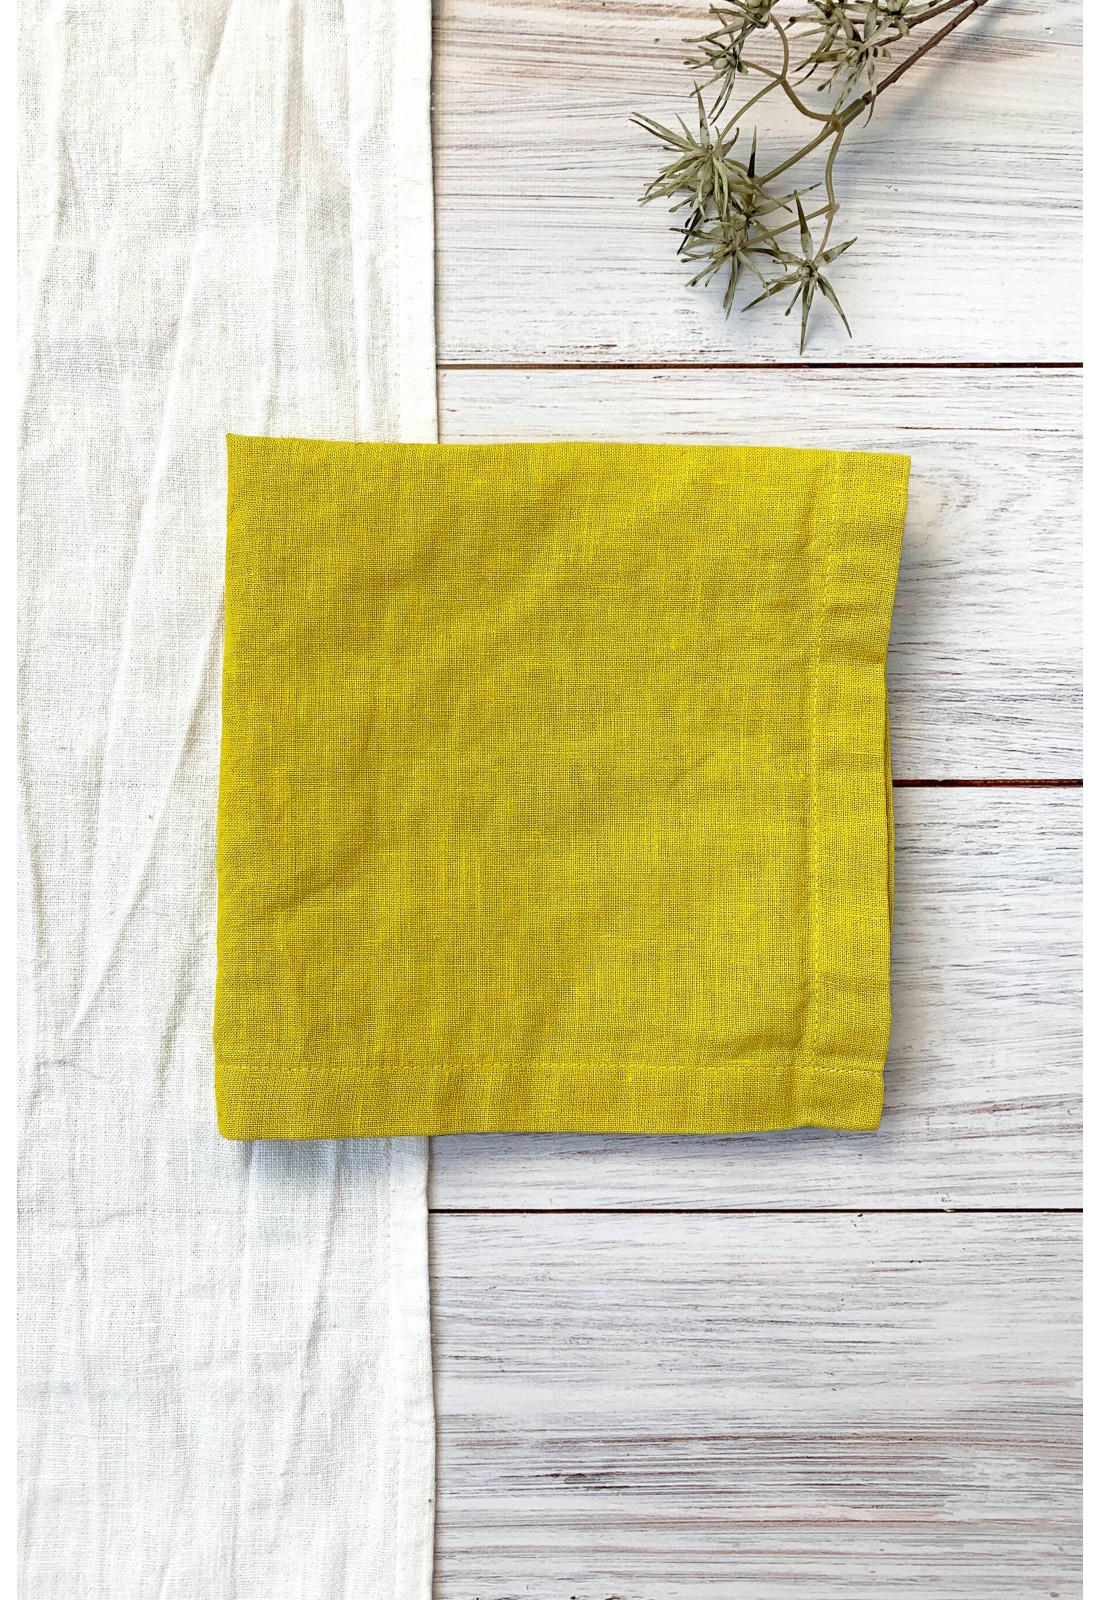 https://www.touchablelinen.com/image/cache/catalog/products/19/Linen-napkins-in-yellow-1100x1600.jpg